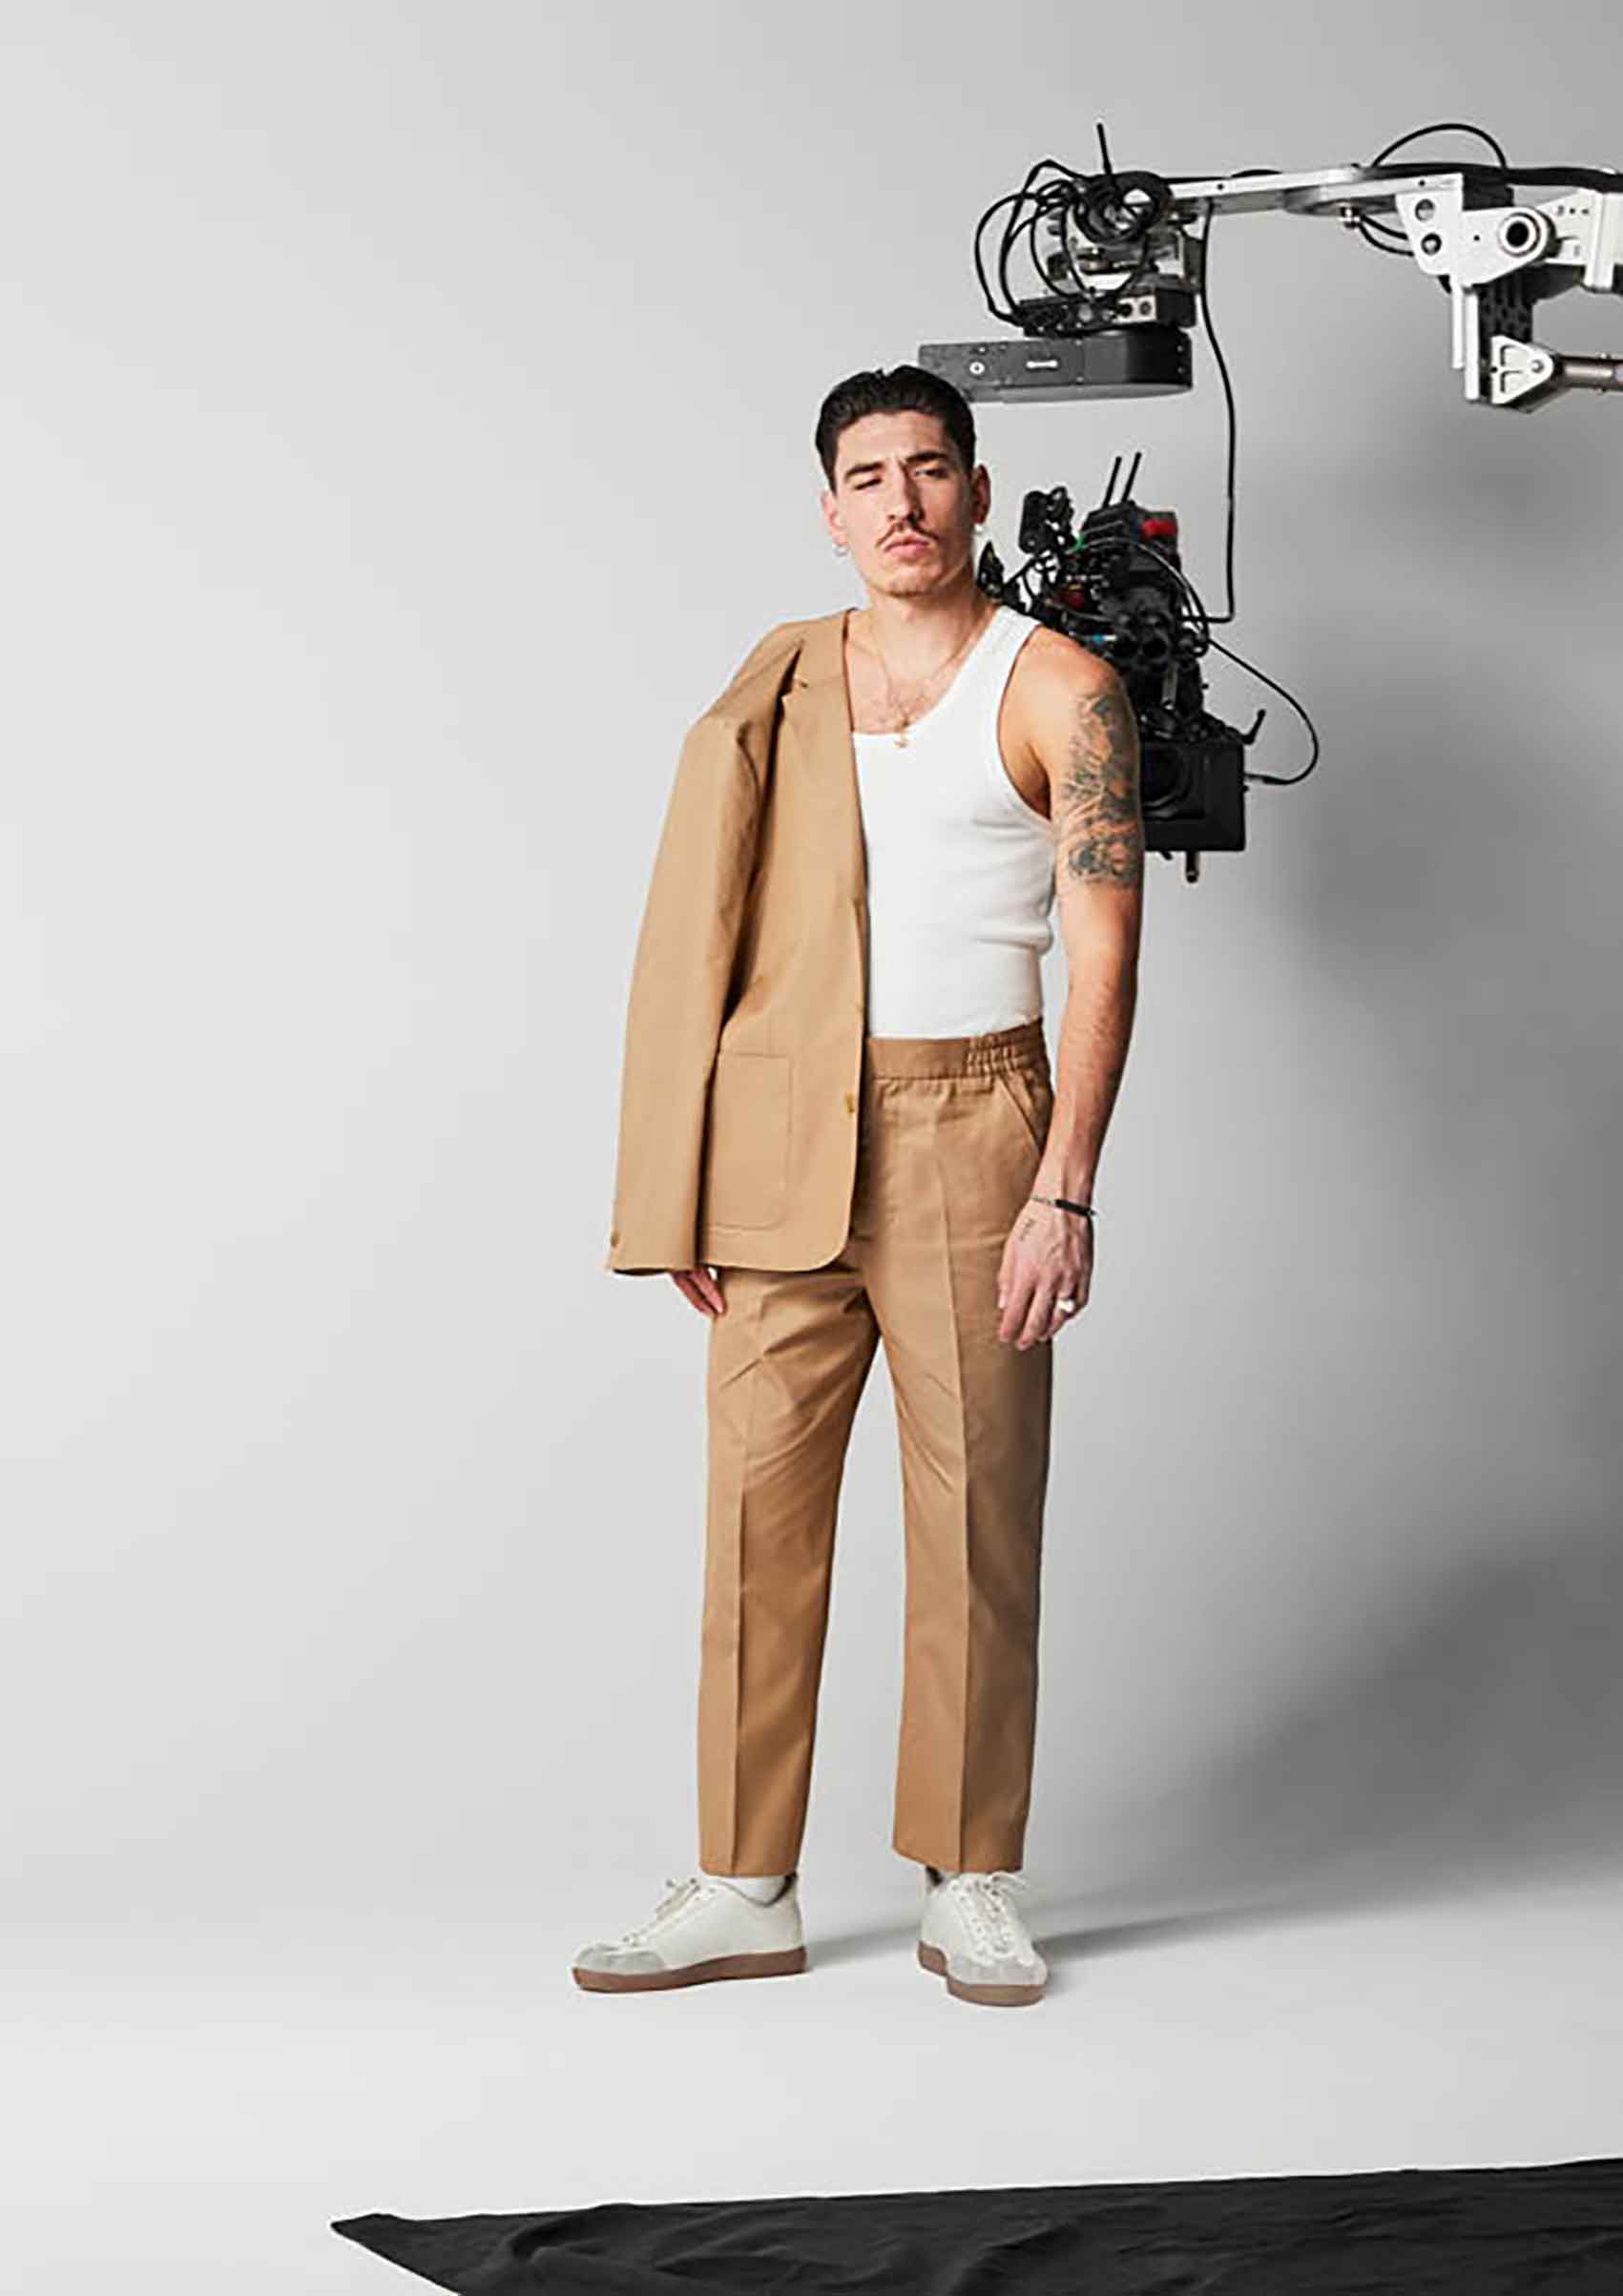 FASHION_HM-Edition-by-Hector-Bellerin